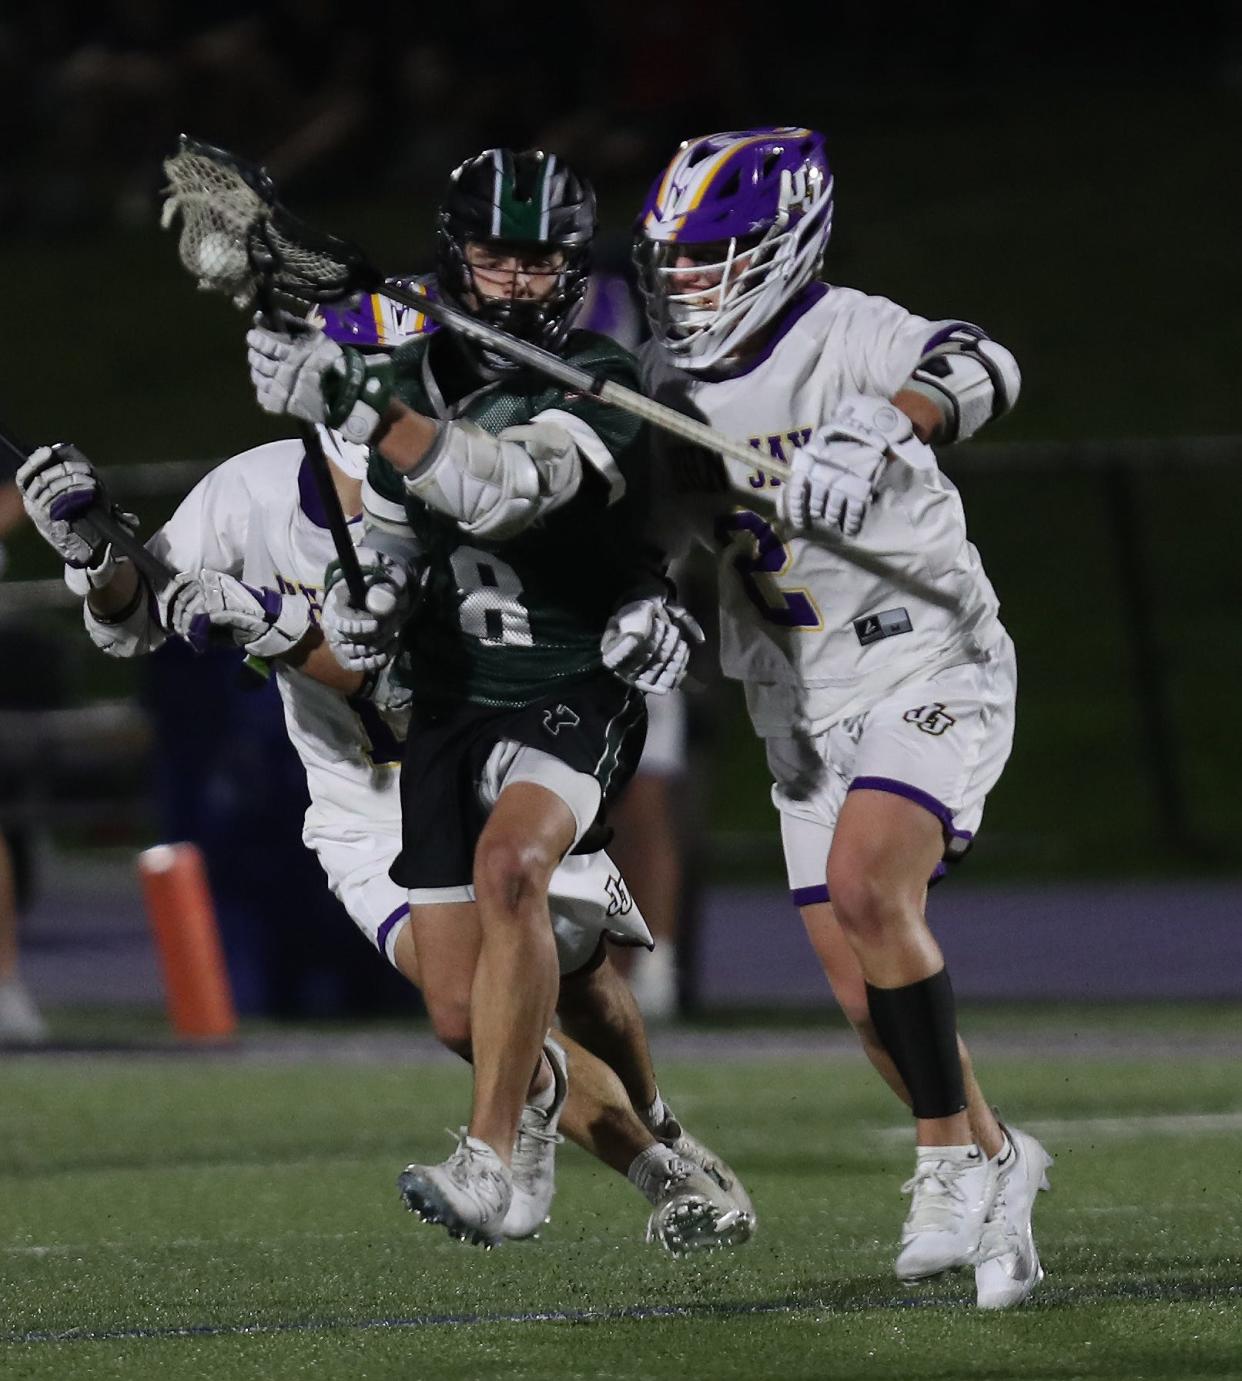 From right, Yorktown's Drew Weissman (8) gets in front of John Jay's Luca Duva (2) during boys lacrosse action at John Jay High School in Cross River April 14, 2023. Yorktown won the game 9-8.